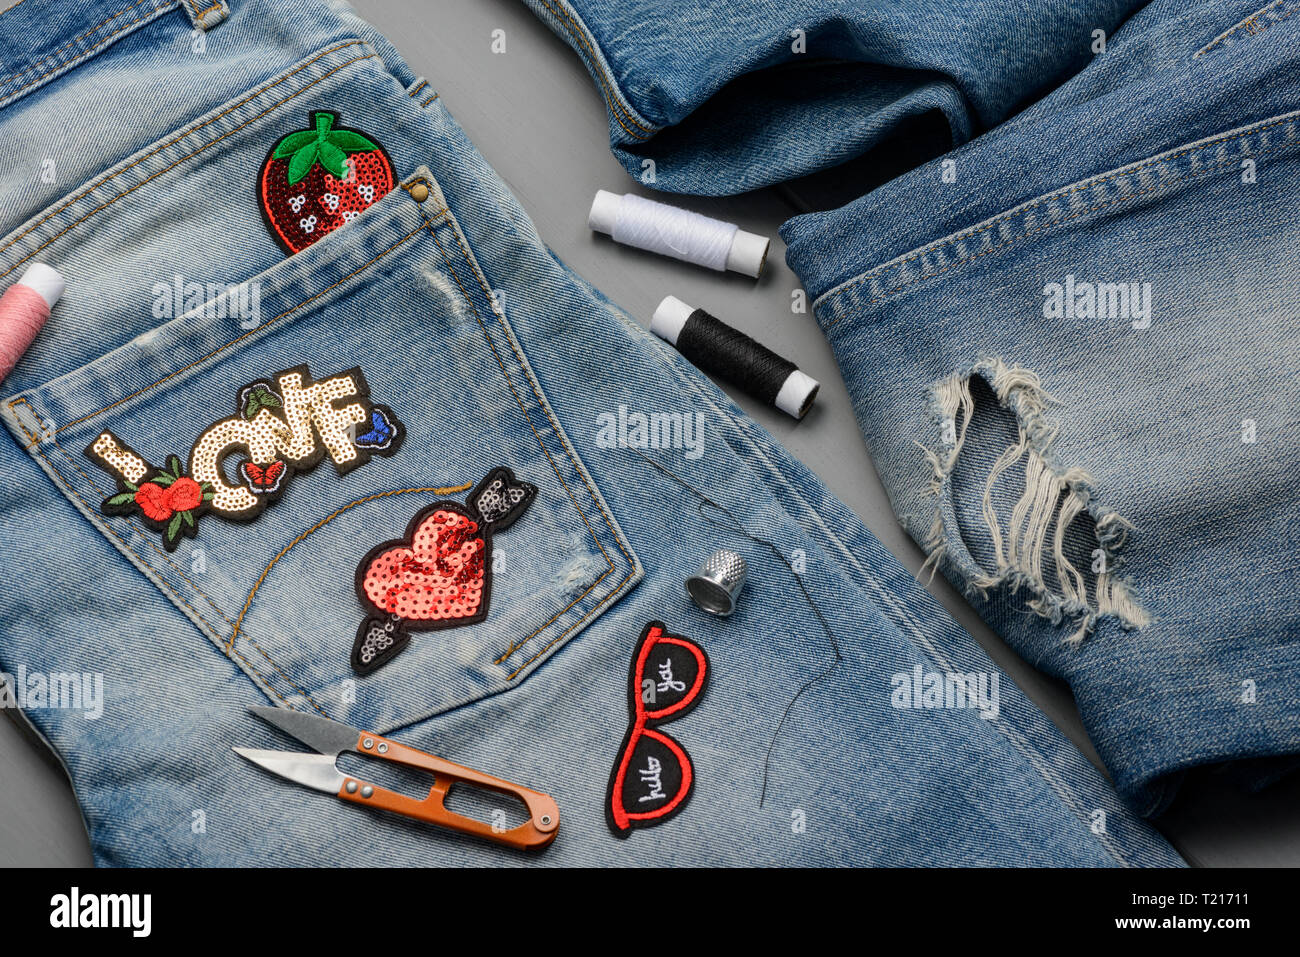 Patches, threads, scissors and jeans Stock Photo